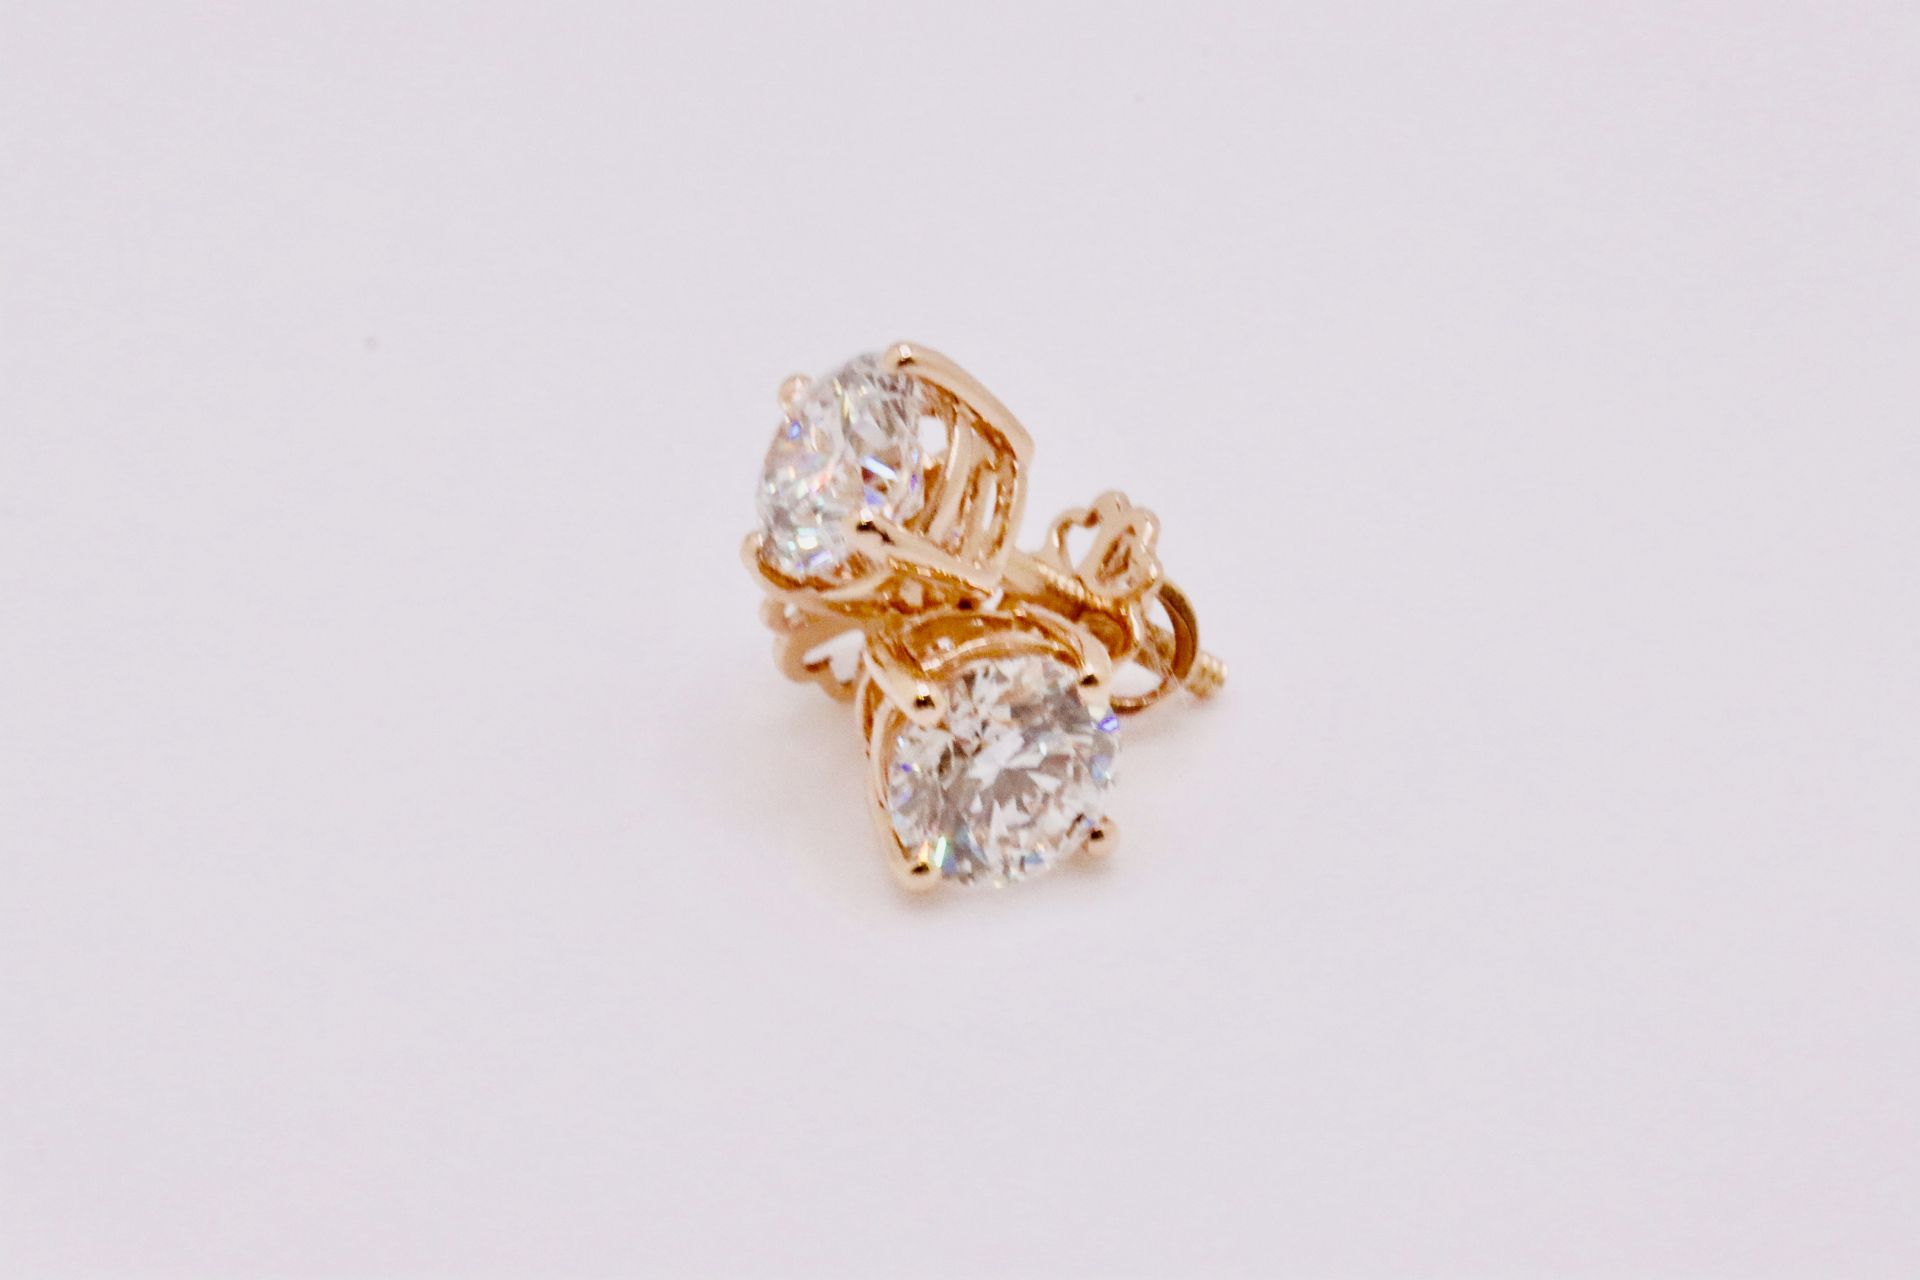 Round Brilliant Cut 4.00 Carat Diamond Earrings Set in 18kt Rose Gold - F Colour VS Clarity - GIA - Image 2 of 4